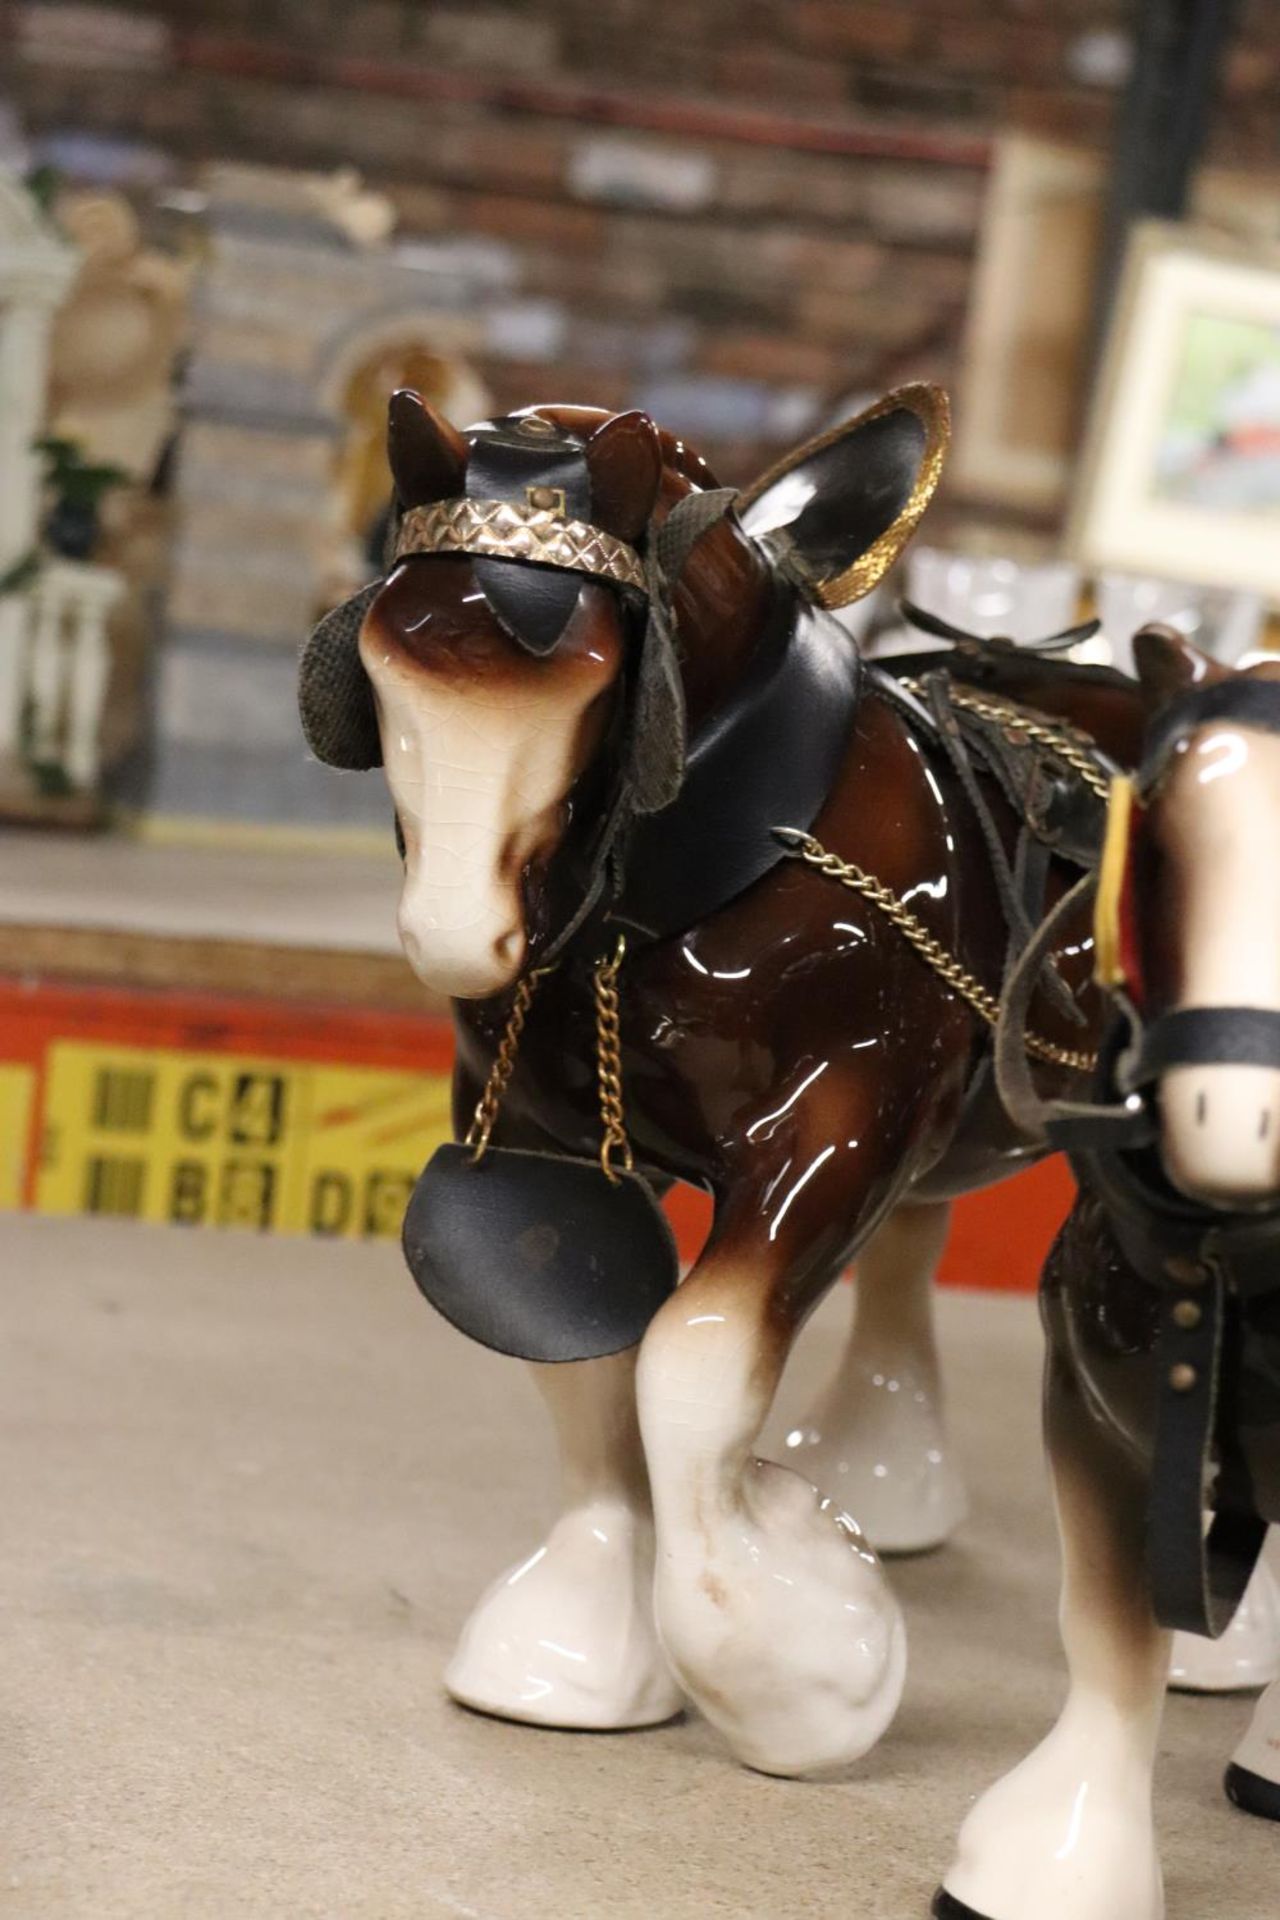 THREE LARGE CERAMIC SHIRE HORSE FIGURES WITH HARNESSES - Image 3 of 6